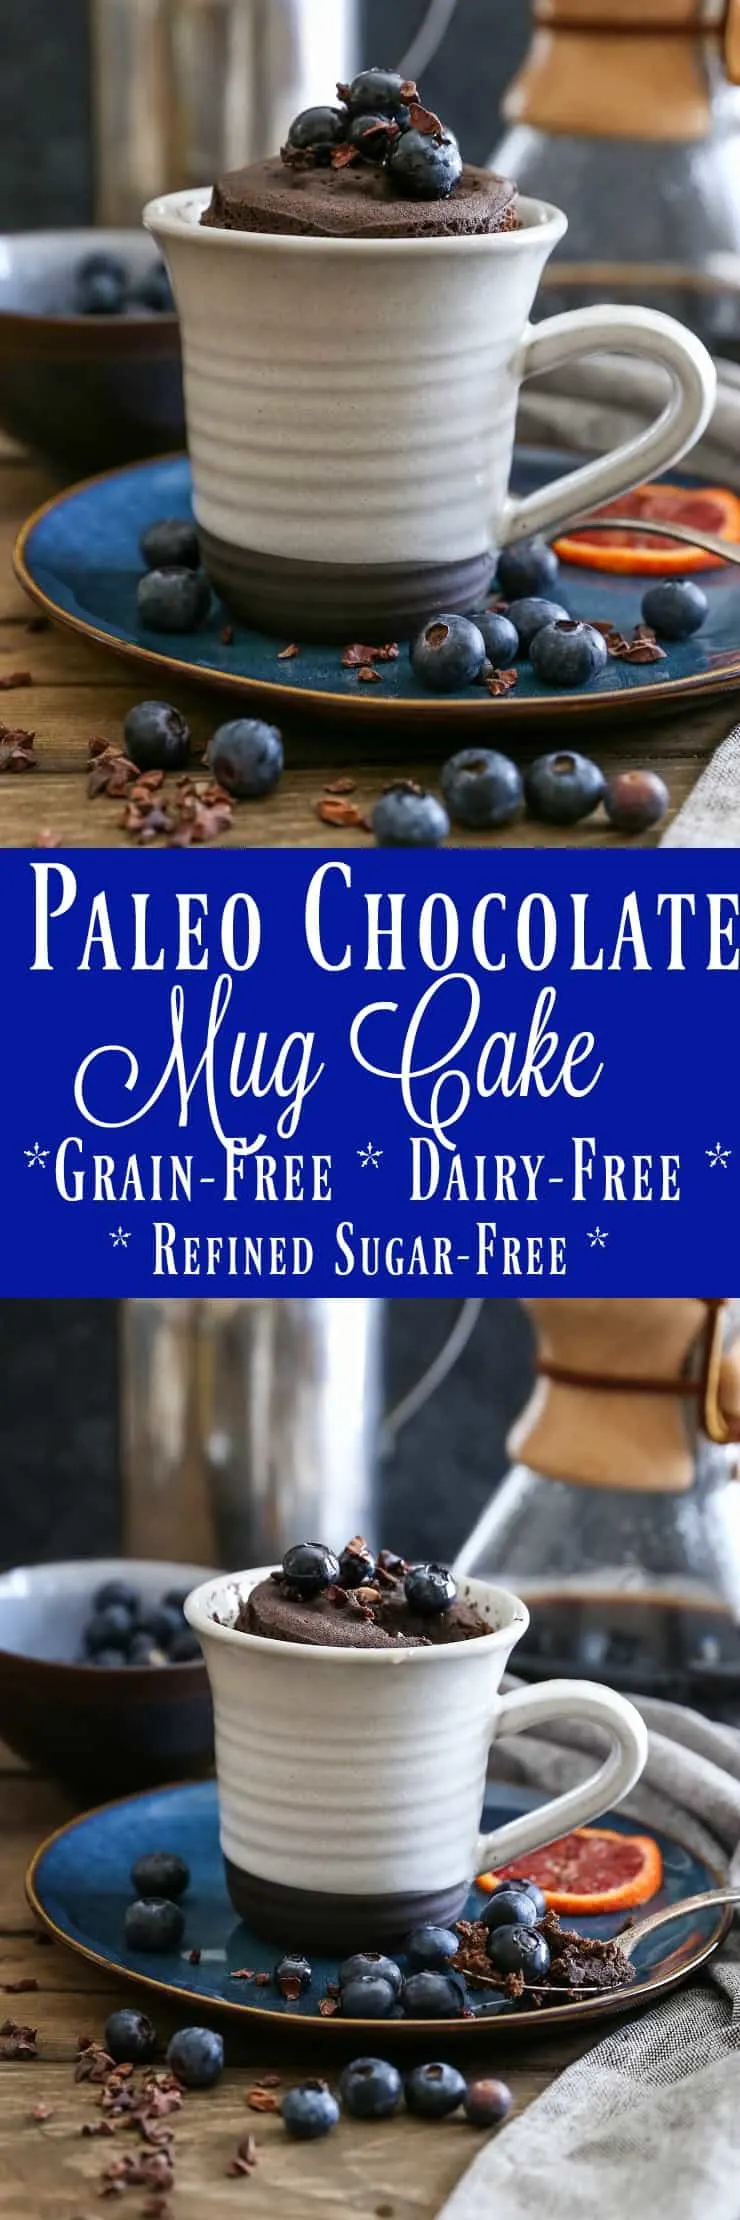 5-Minute Paleo Chocolate Mug Cake made grain-free, refined sugar-free, and dairy-free. This healthy cake-for-one takes hardly any effort to make and is absolutely delicious!